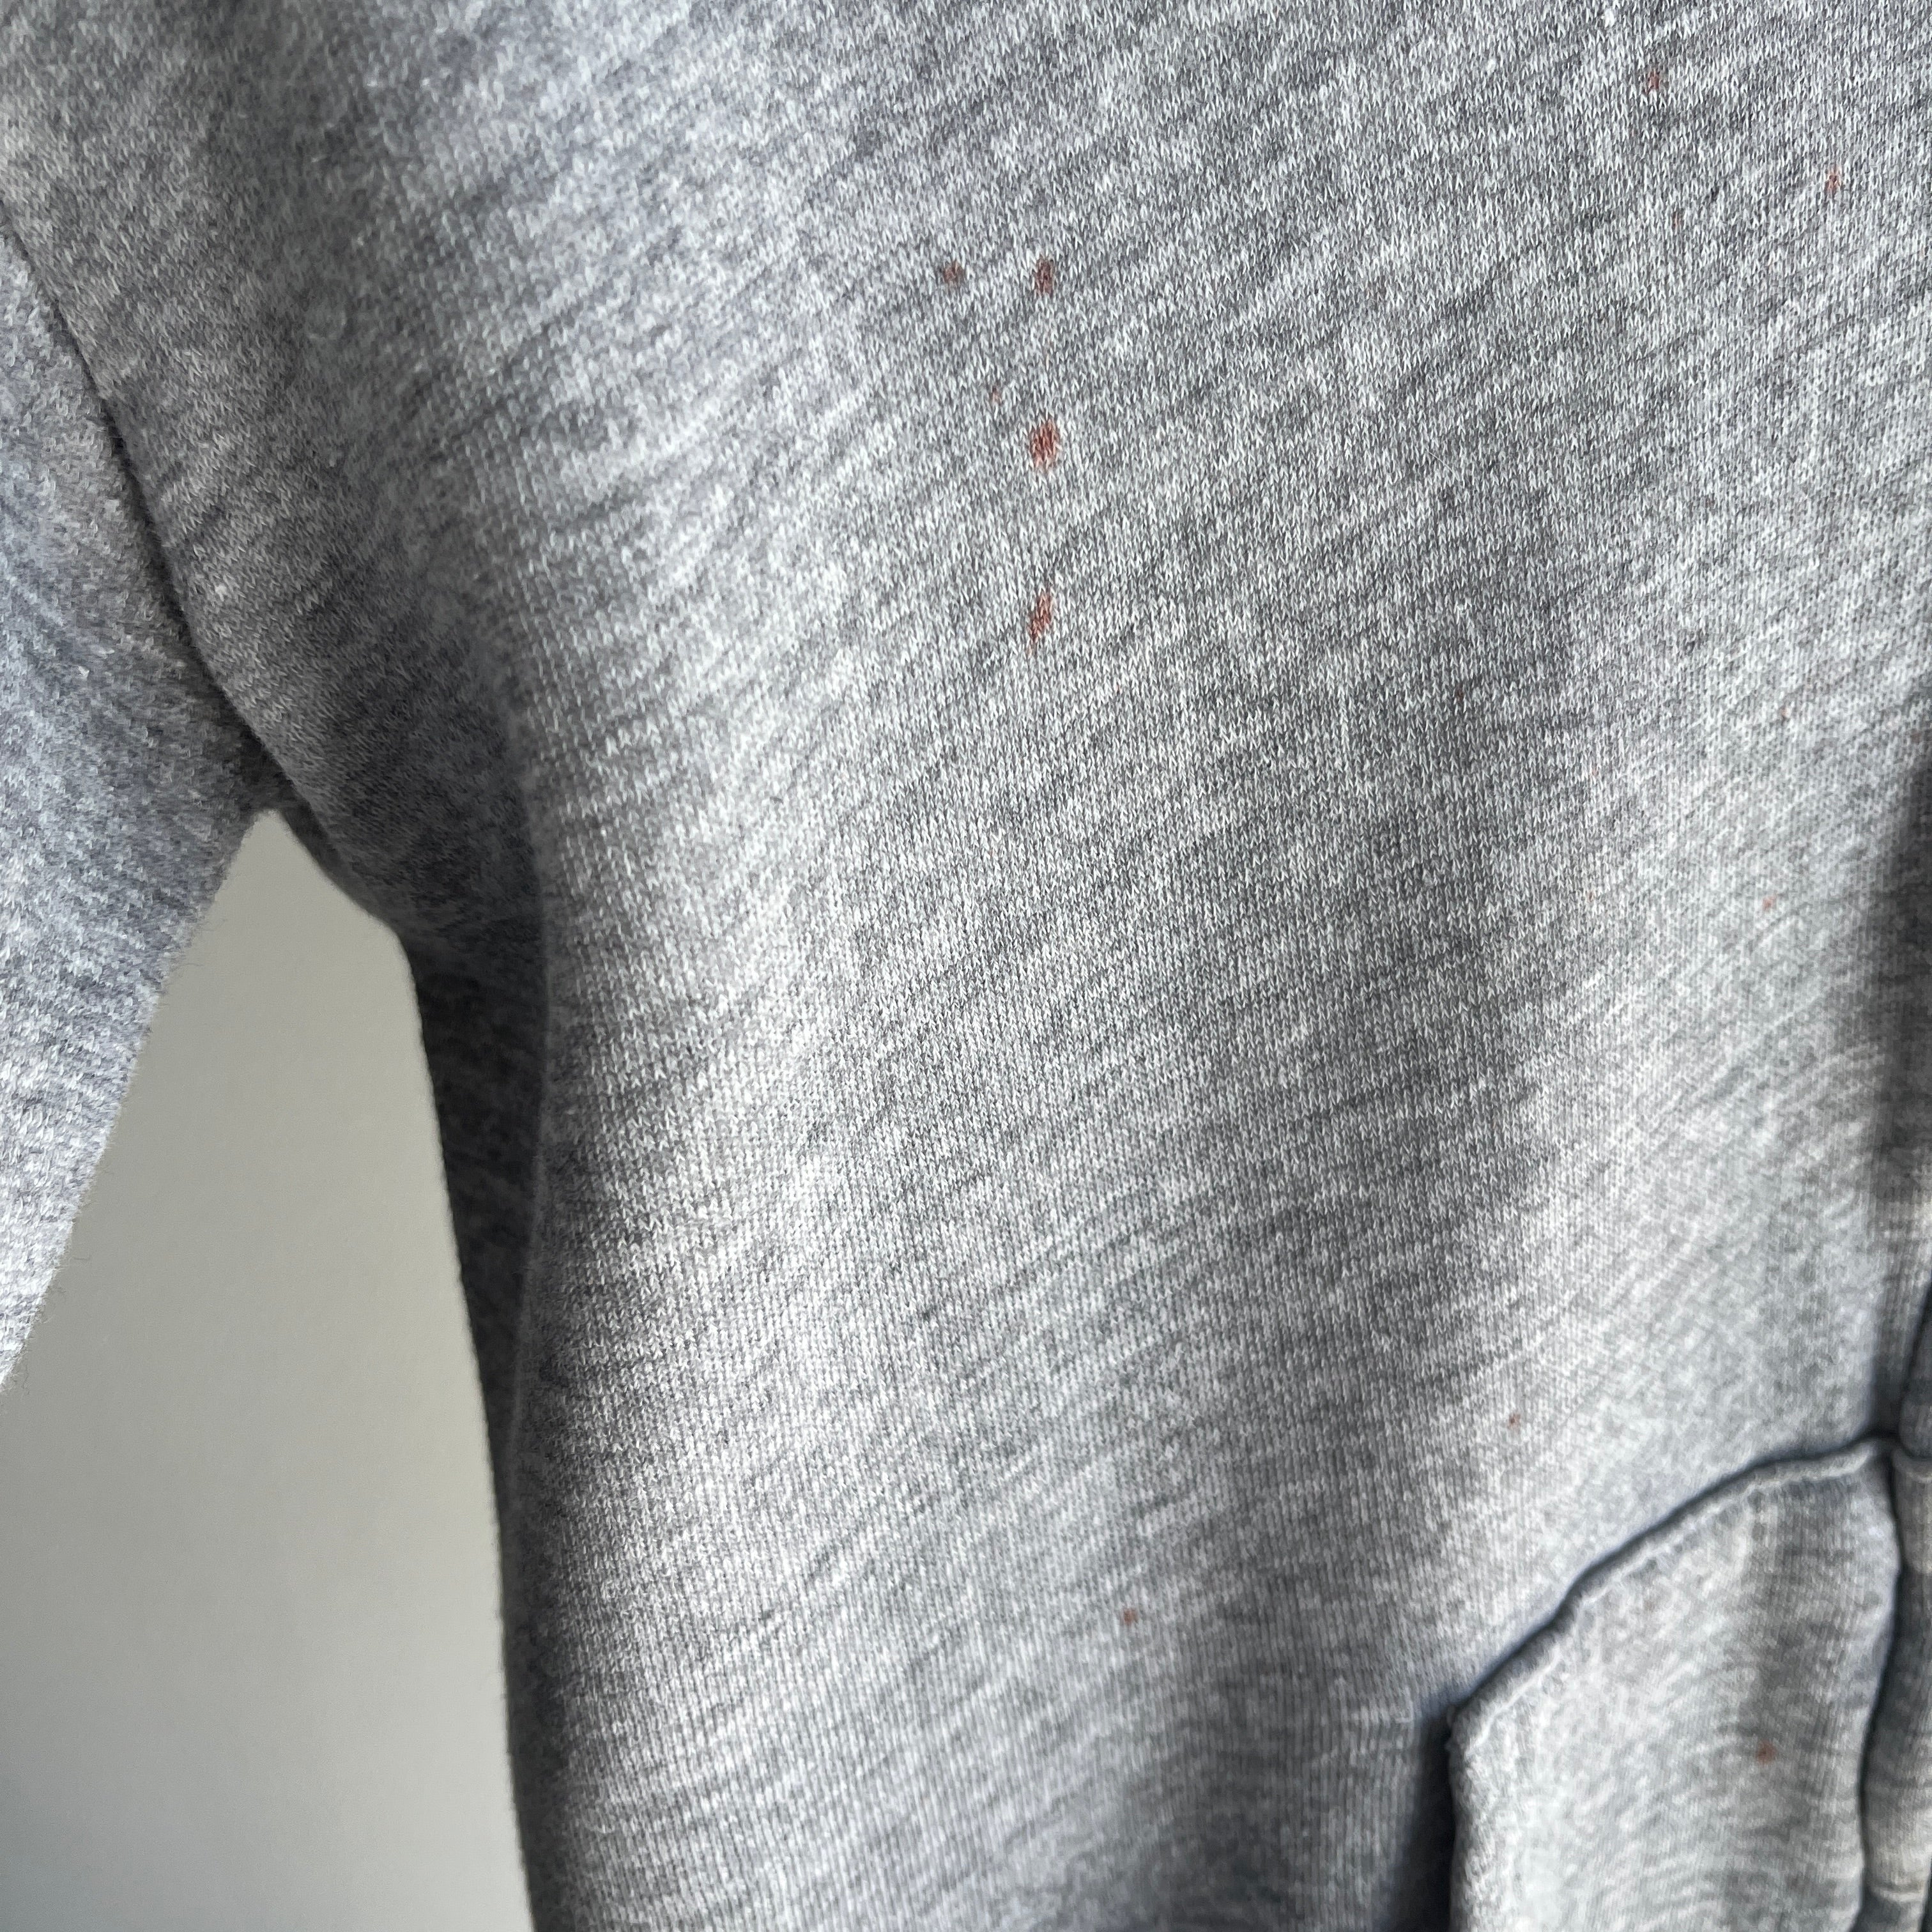 1980s Blank Gray Hoodie with Red Paint Staining and Bleached Out Sleeves